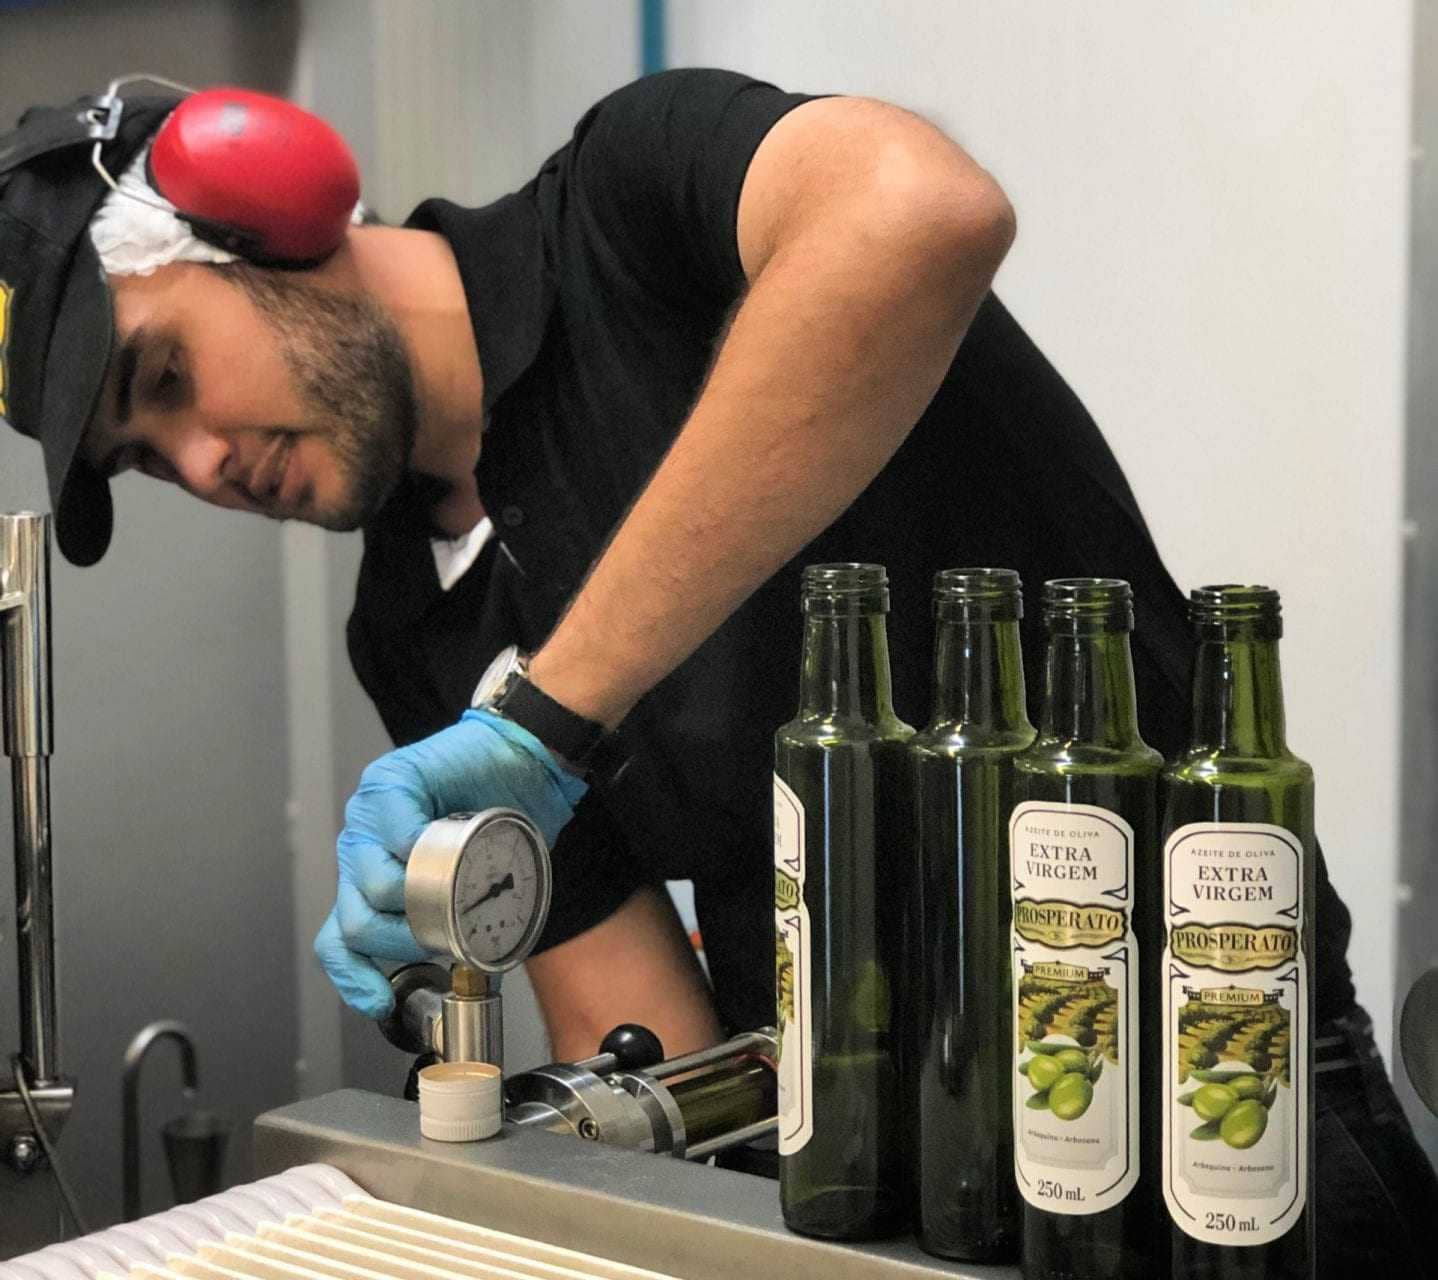 competitions-production-south-america-the-best-olive-oils-another-record-year-suggests-a-trend-in-brazil-producers-say-olive-oil-times